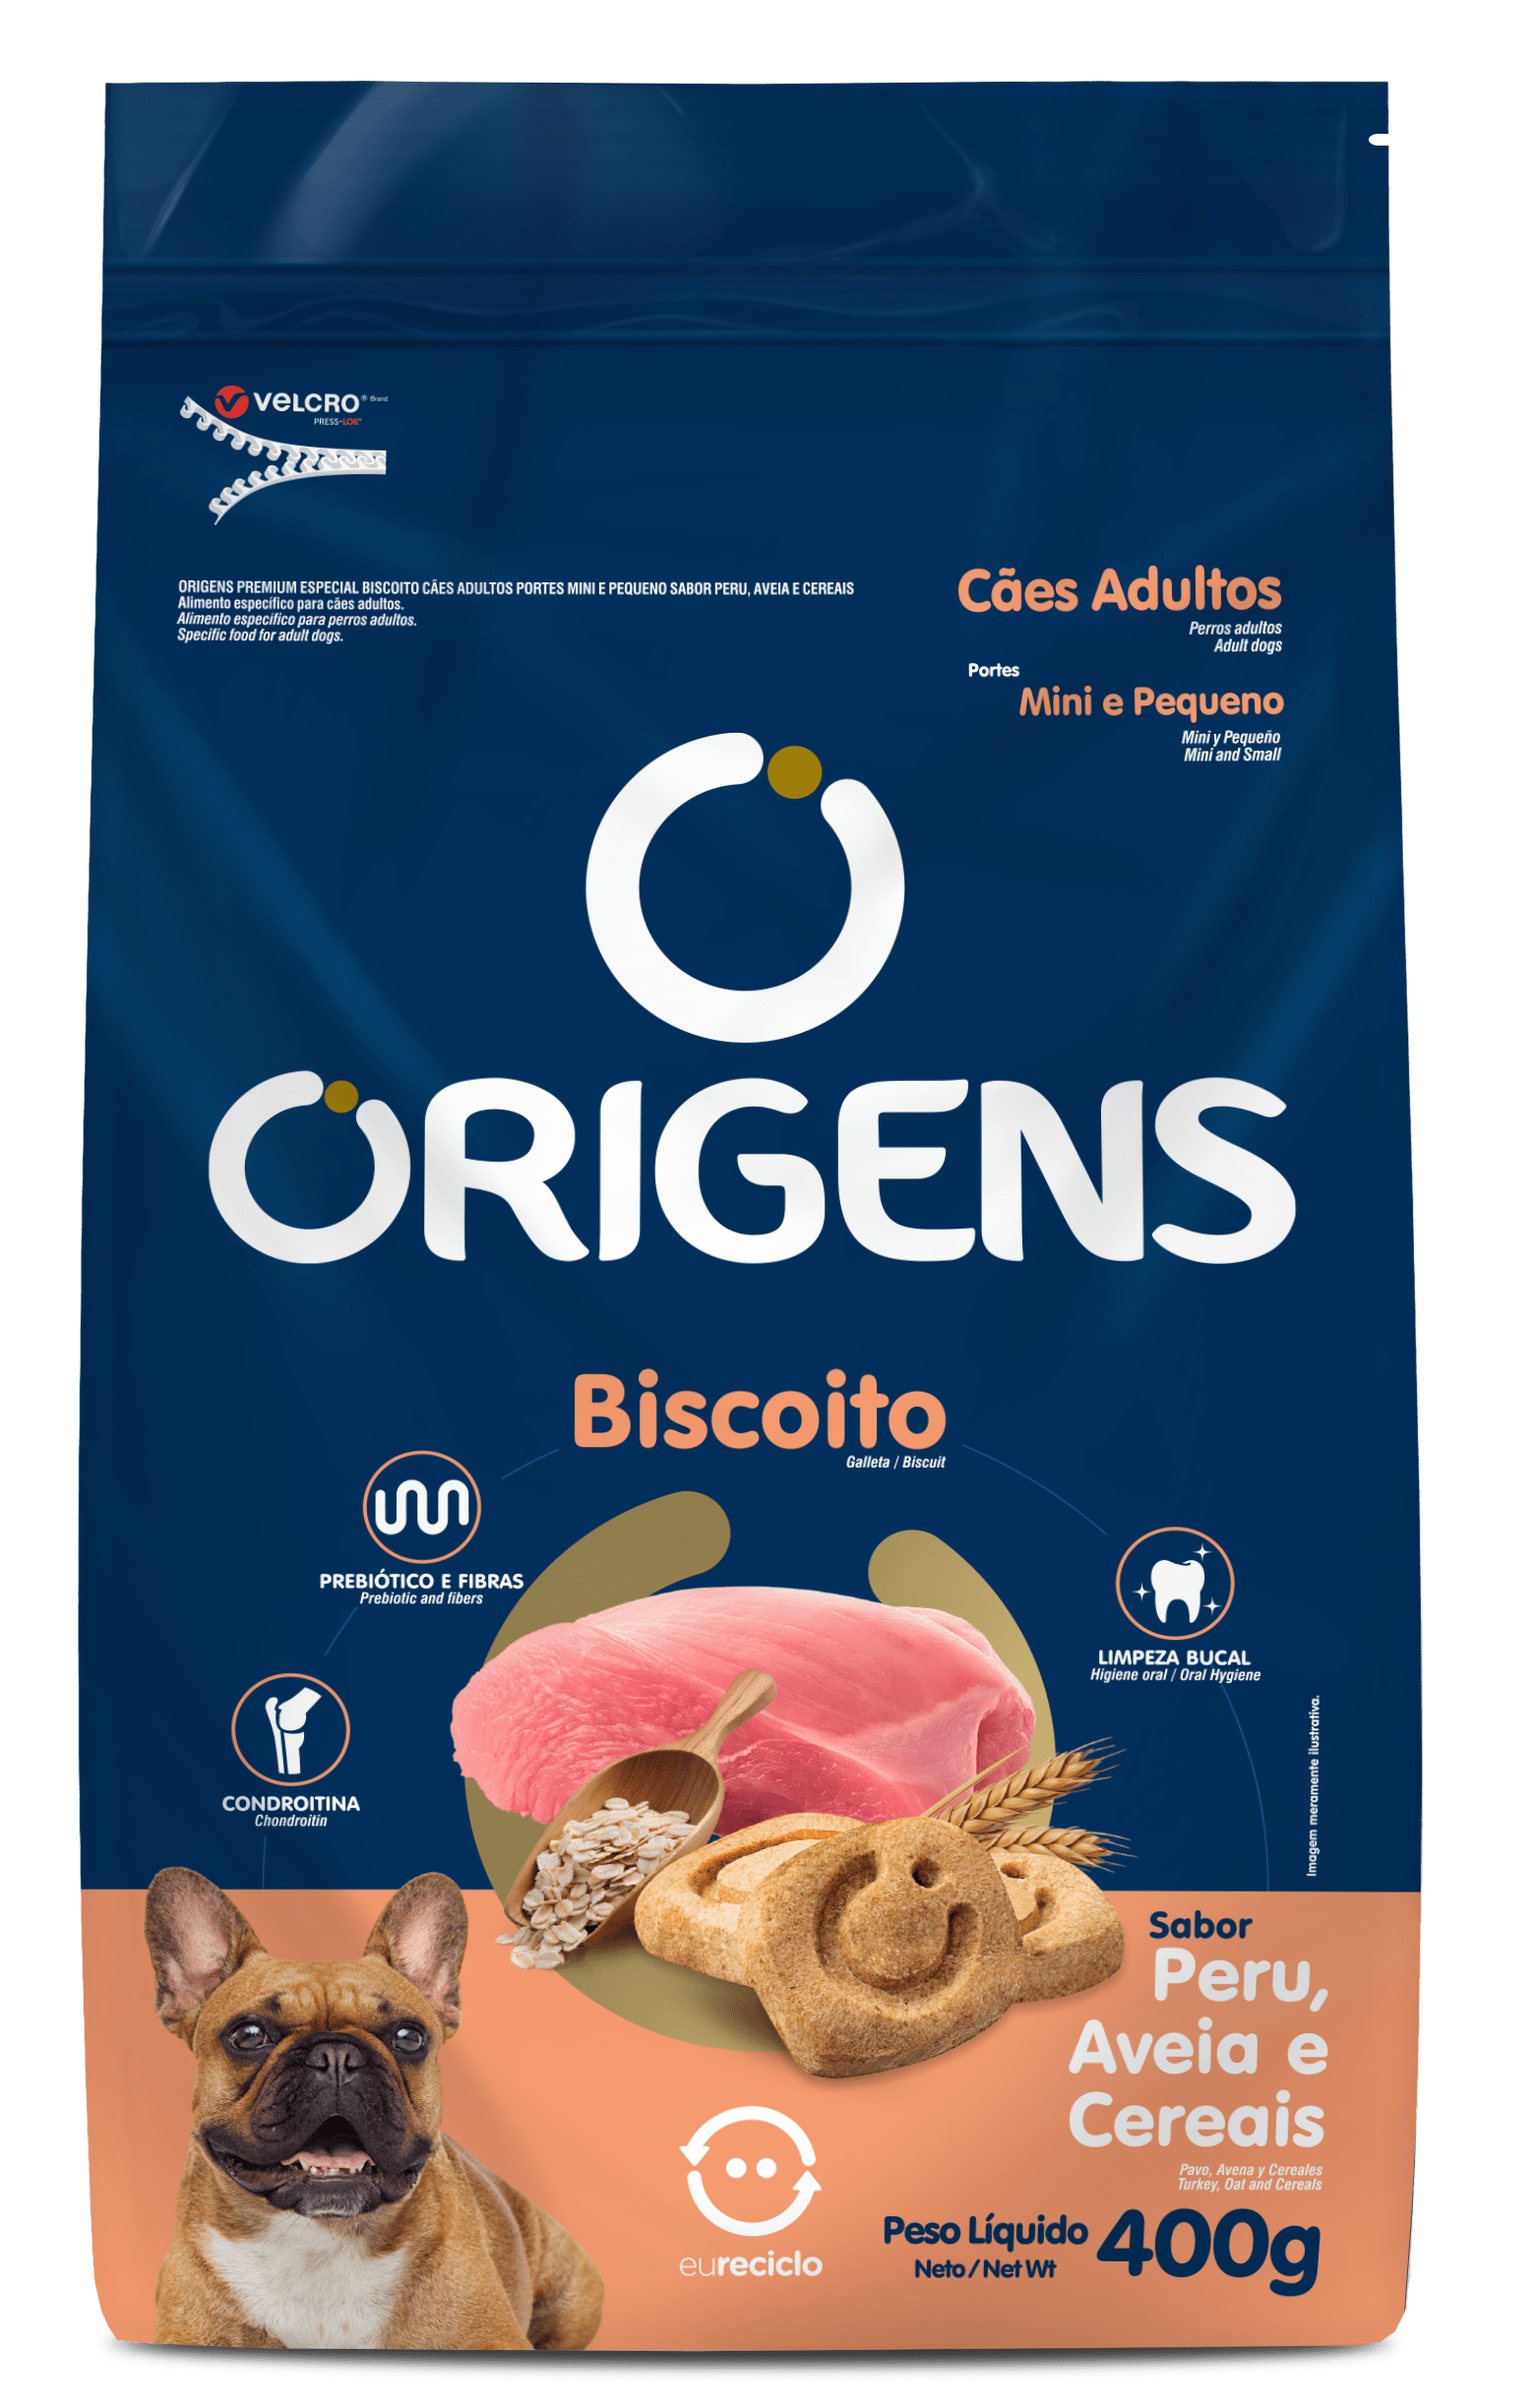 Origens Premium Especial Biscuit Adult Dogs Mini and Small Breeds Turkey, Oat and Cereals flavor